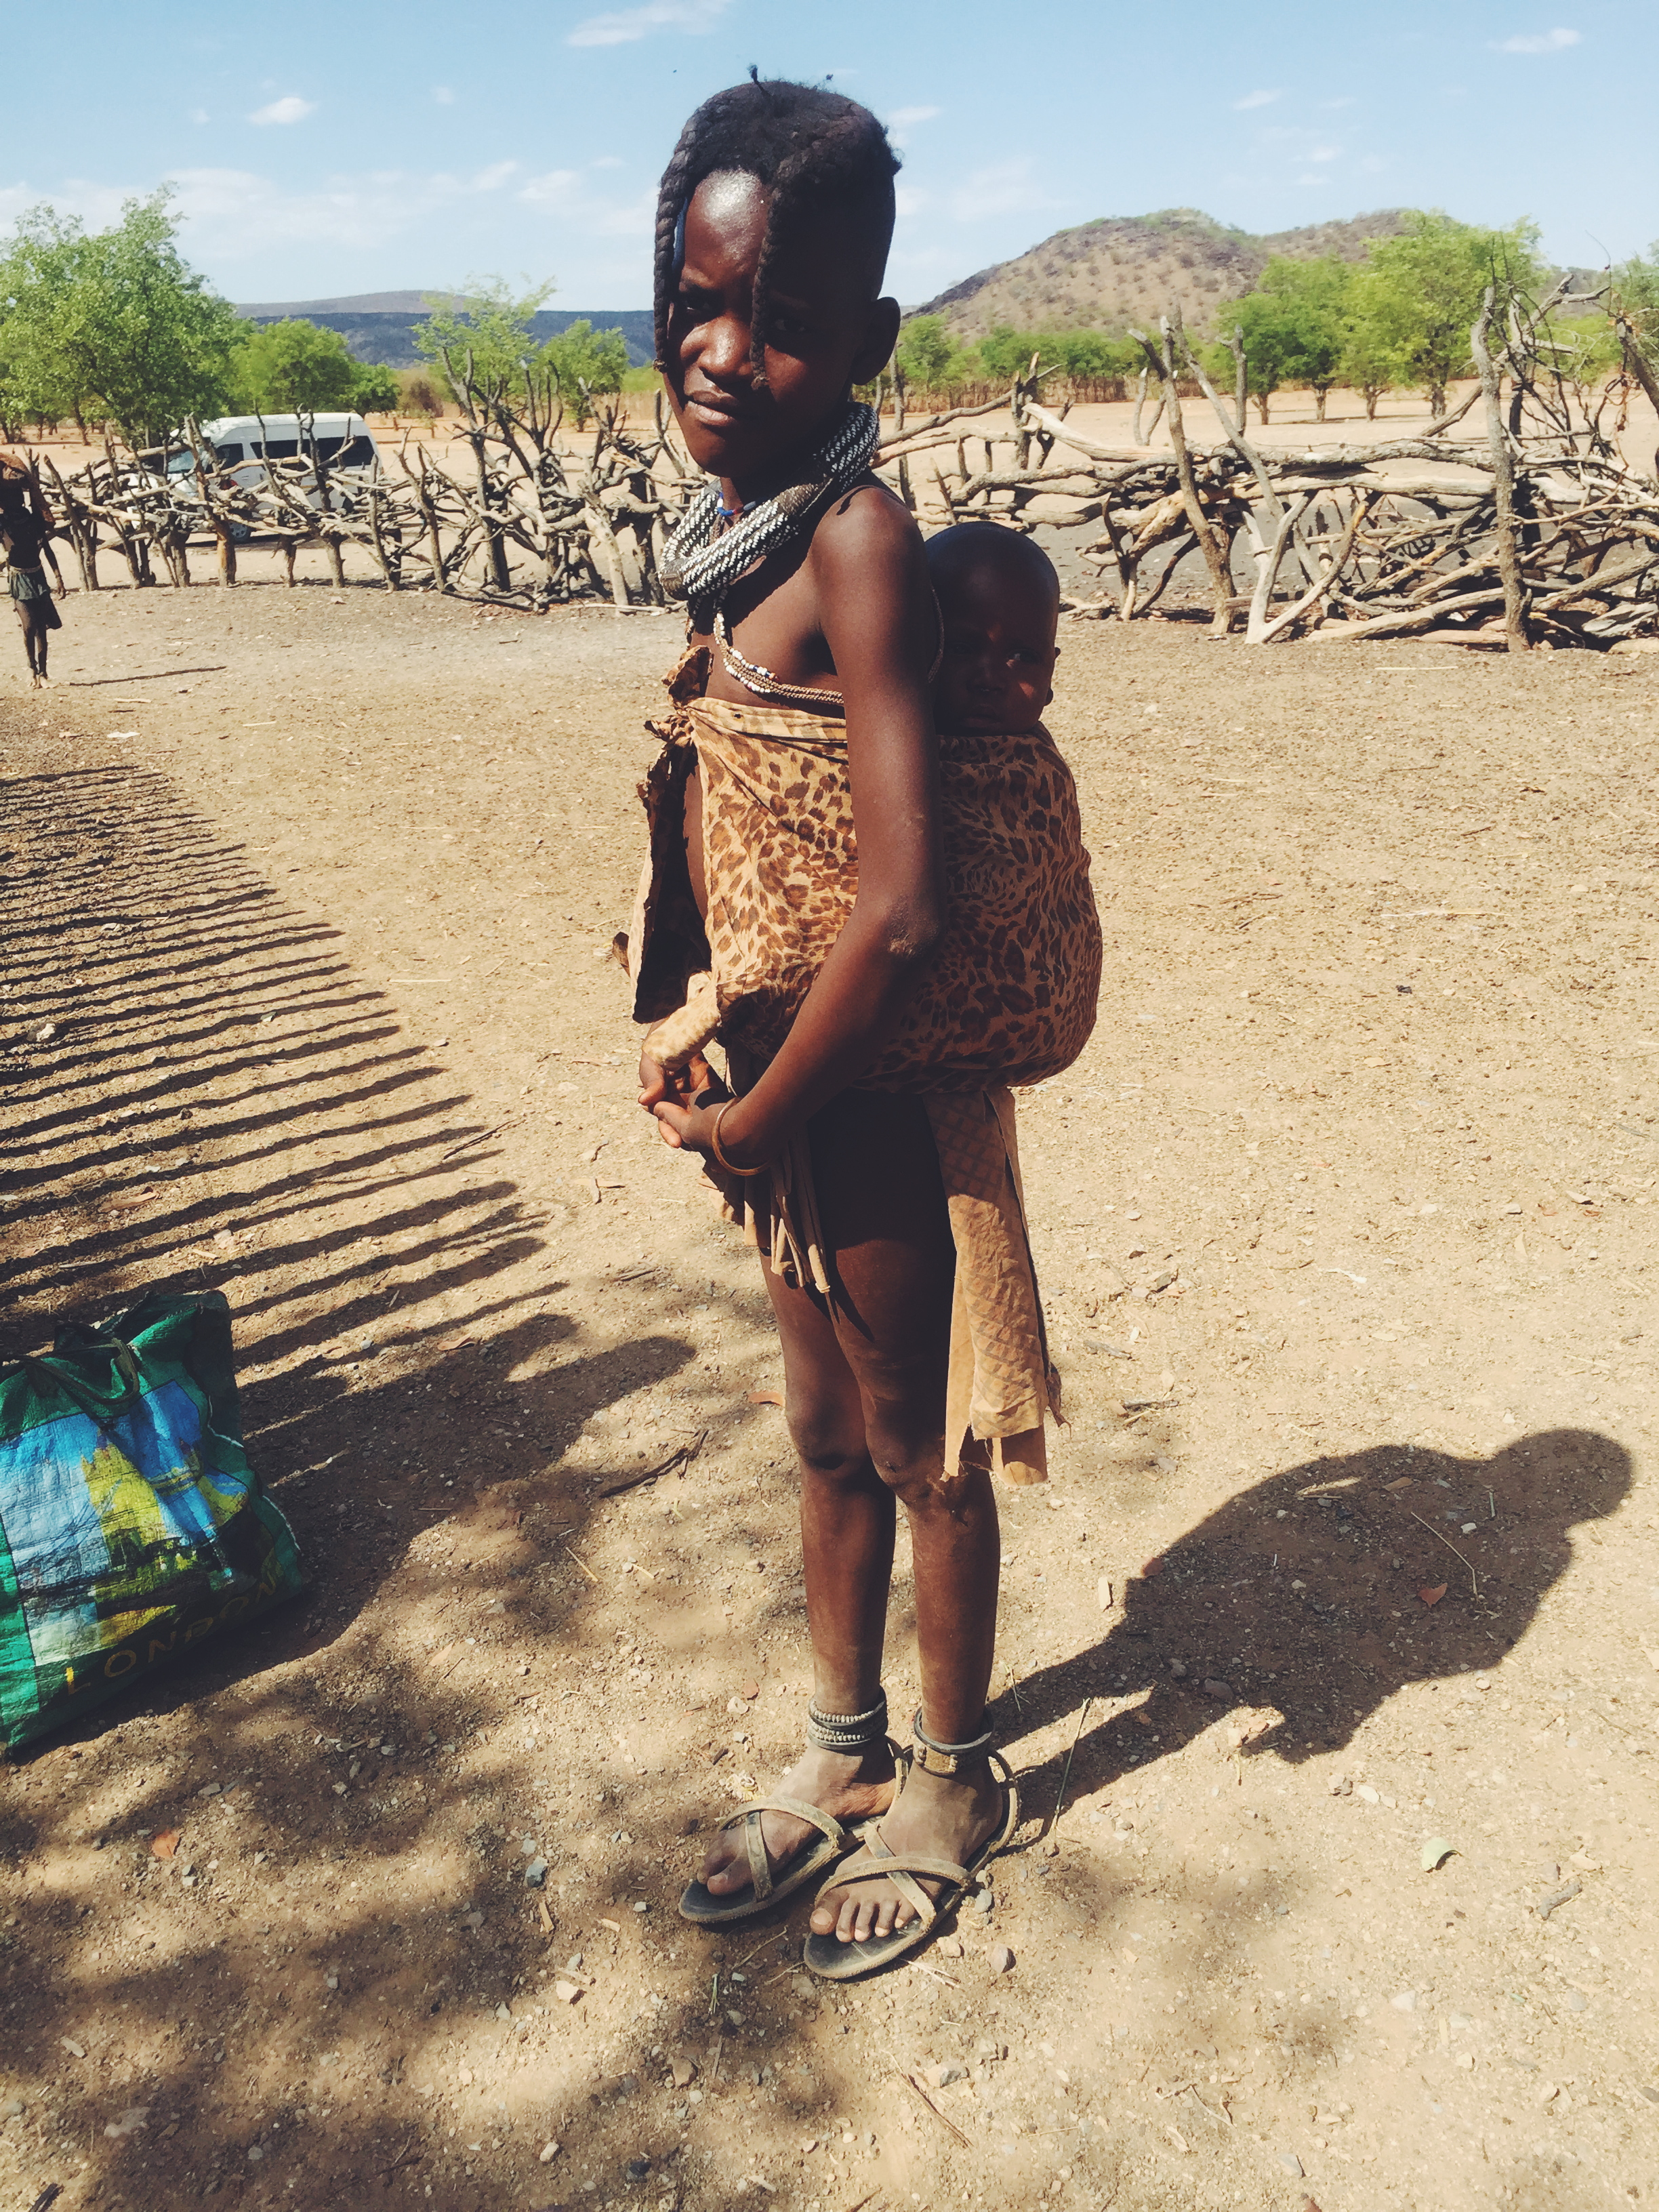 Opuwa, Namibia - Himba tribe. Her name was Ana, and she was watching after her little sister.